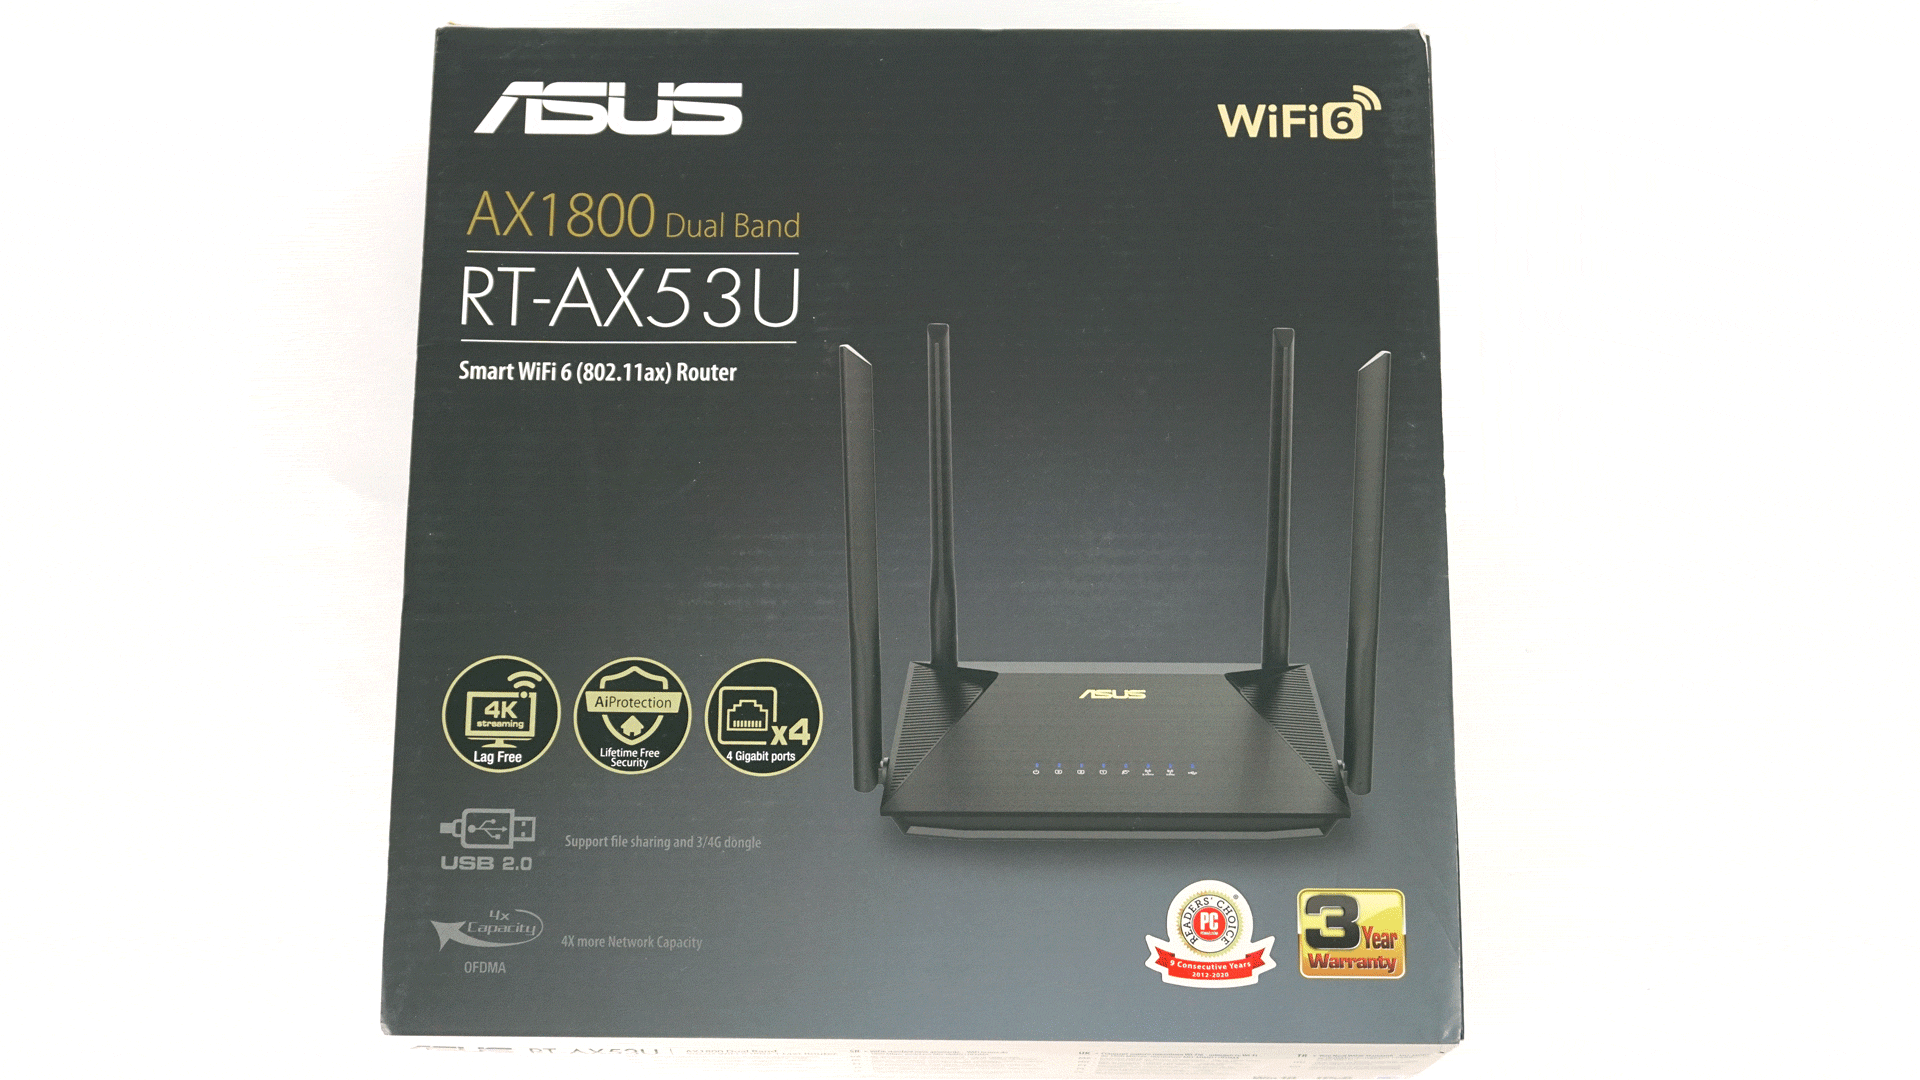 WiFi test, in the 6 masses for RT-AX53U: Asus Cheap or router